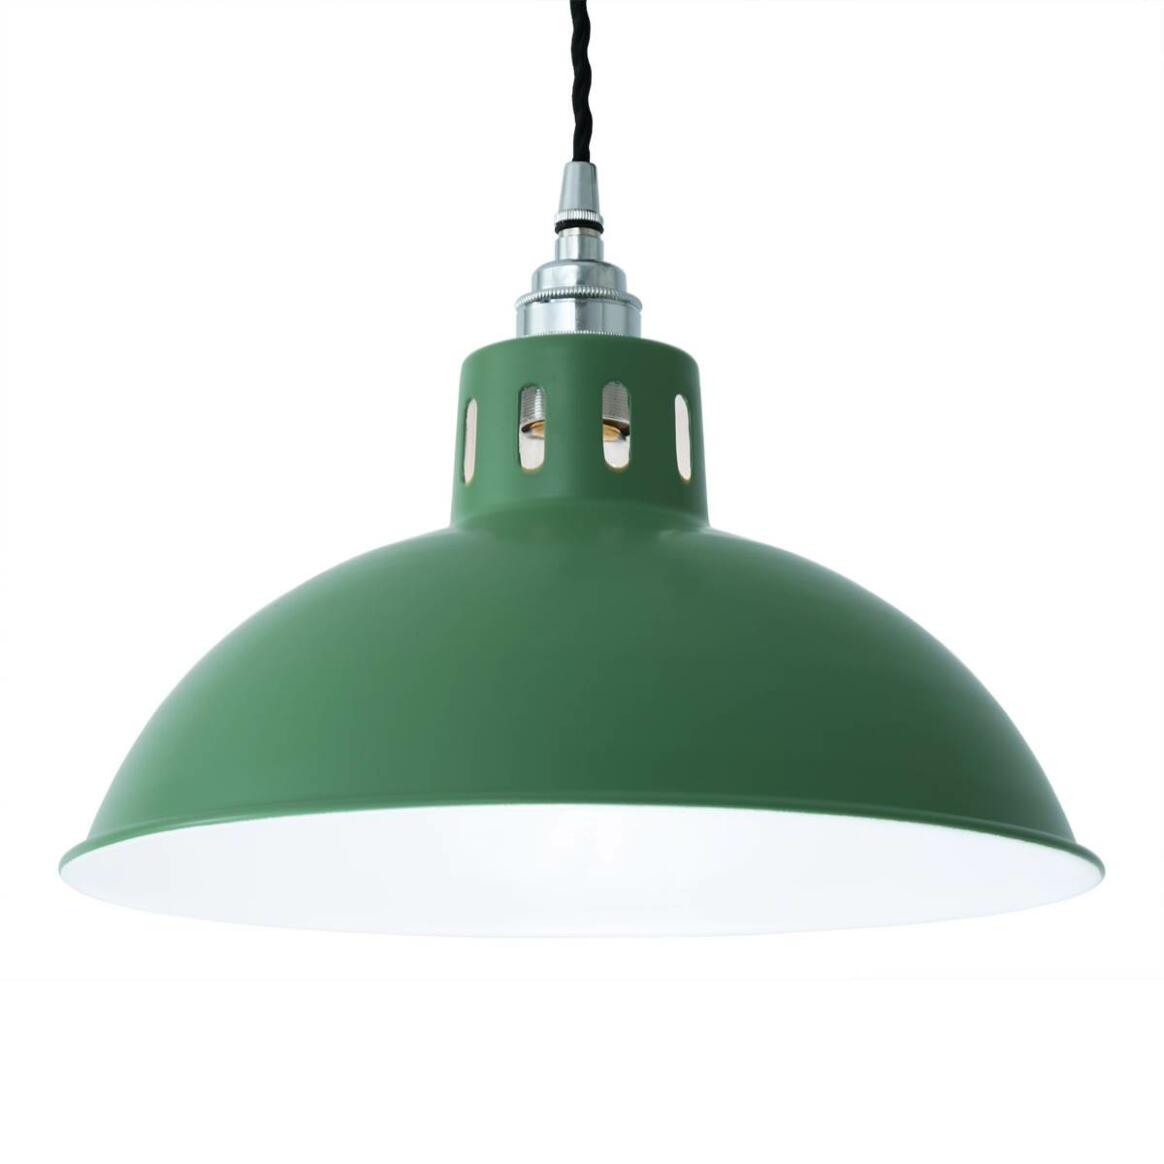 Osson Industrial Factory Pendant Light 11.8" main product image